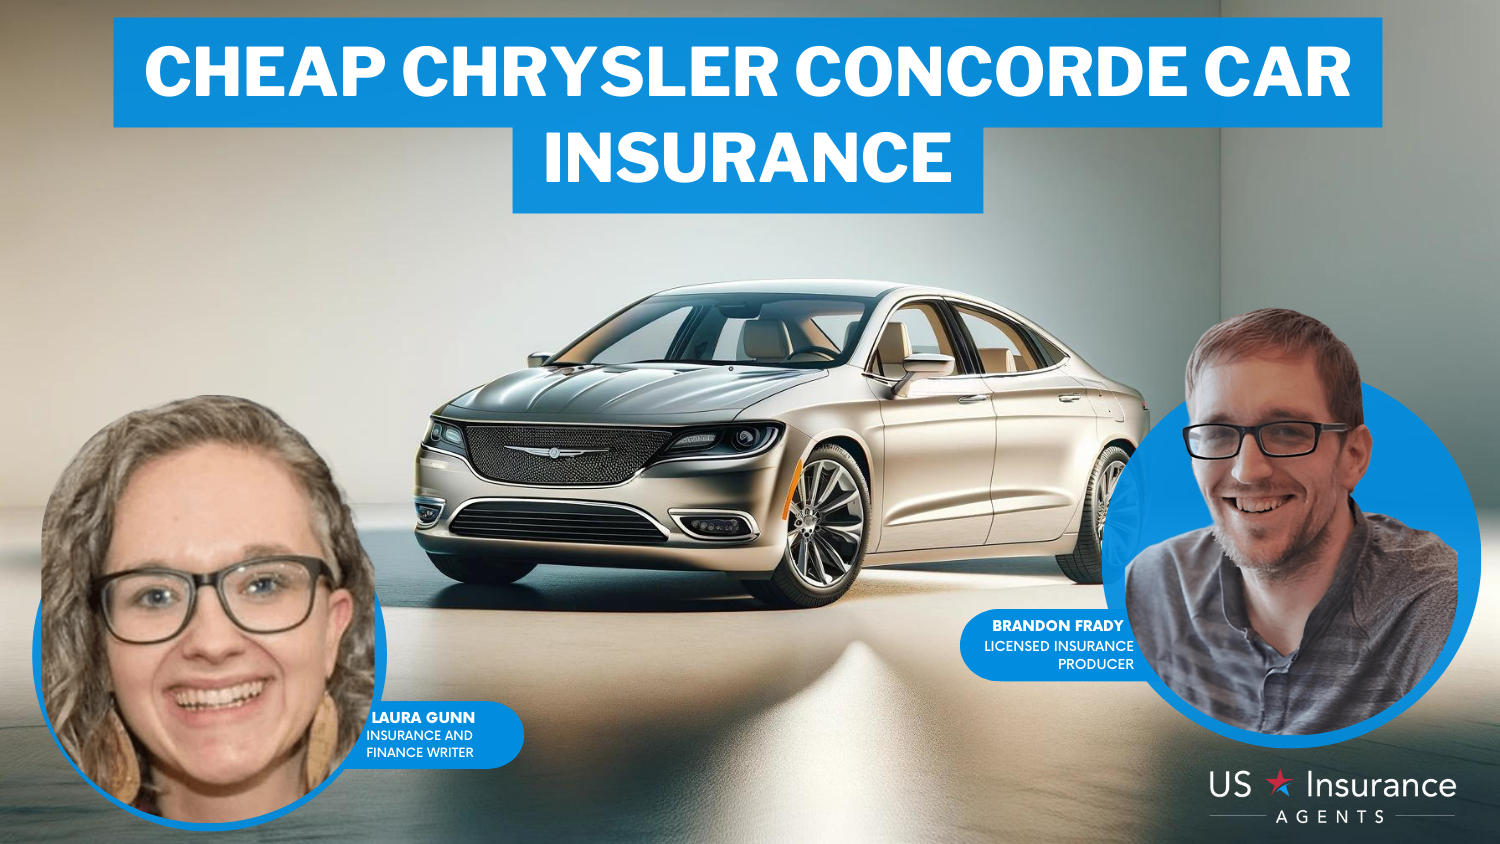 State Farm, Travelers and USAA: cheap Chrysler Concorde car insurance